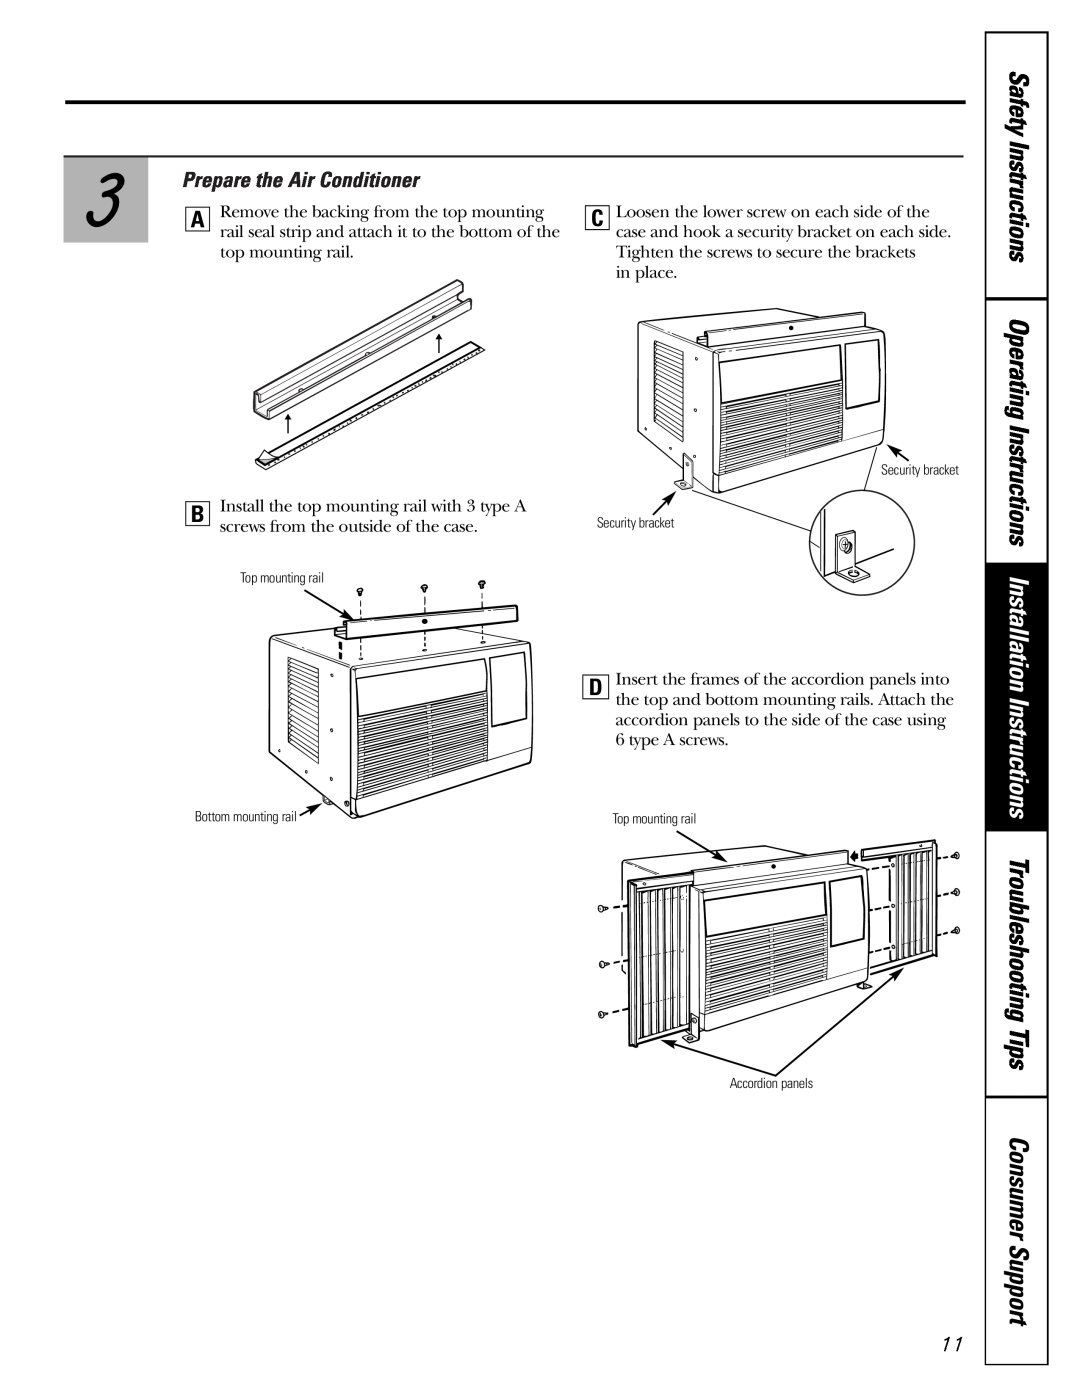 GE ASP05 owner manual Safety Instructions Operating, Prepare the Air Conditioner 